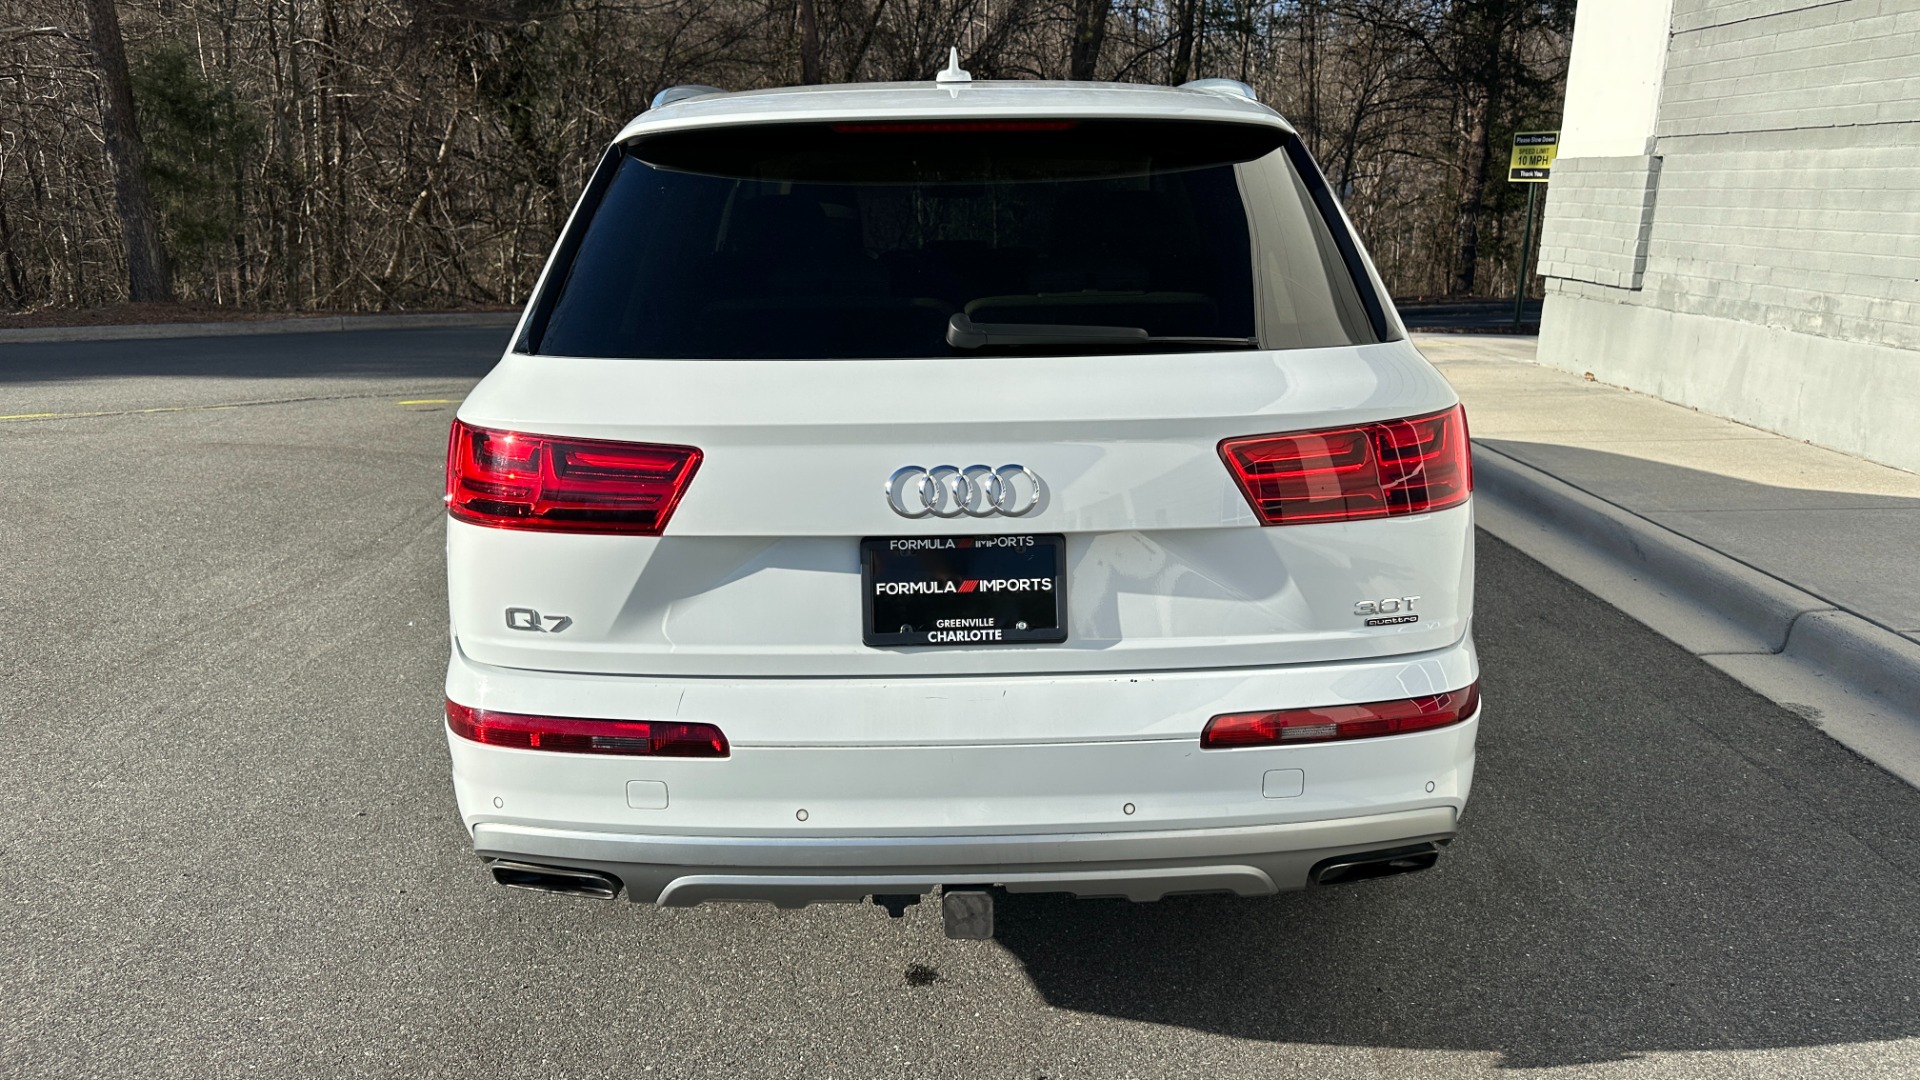 Used 2018 Audi Q7 PRESTIGE / COLD WEATHER PKG / TOWING PACKAGE / DRIVER ASSIST for sale $39,999 at Formula Imports in Charlotte NC 28227 8